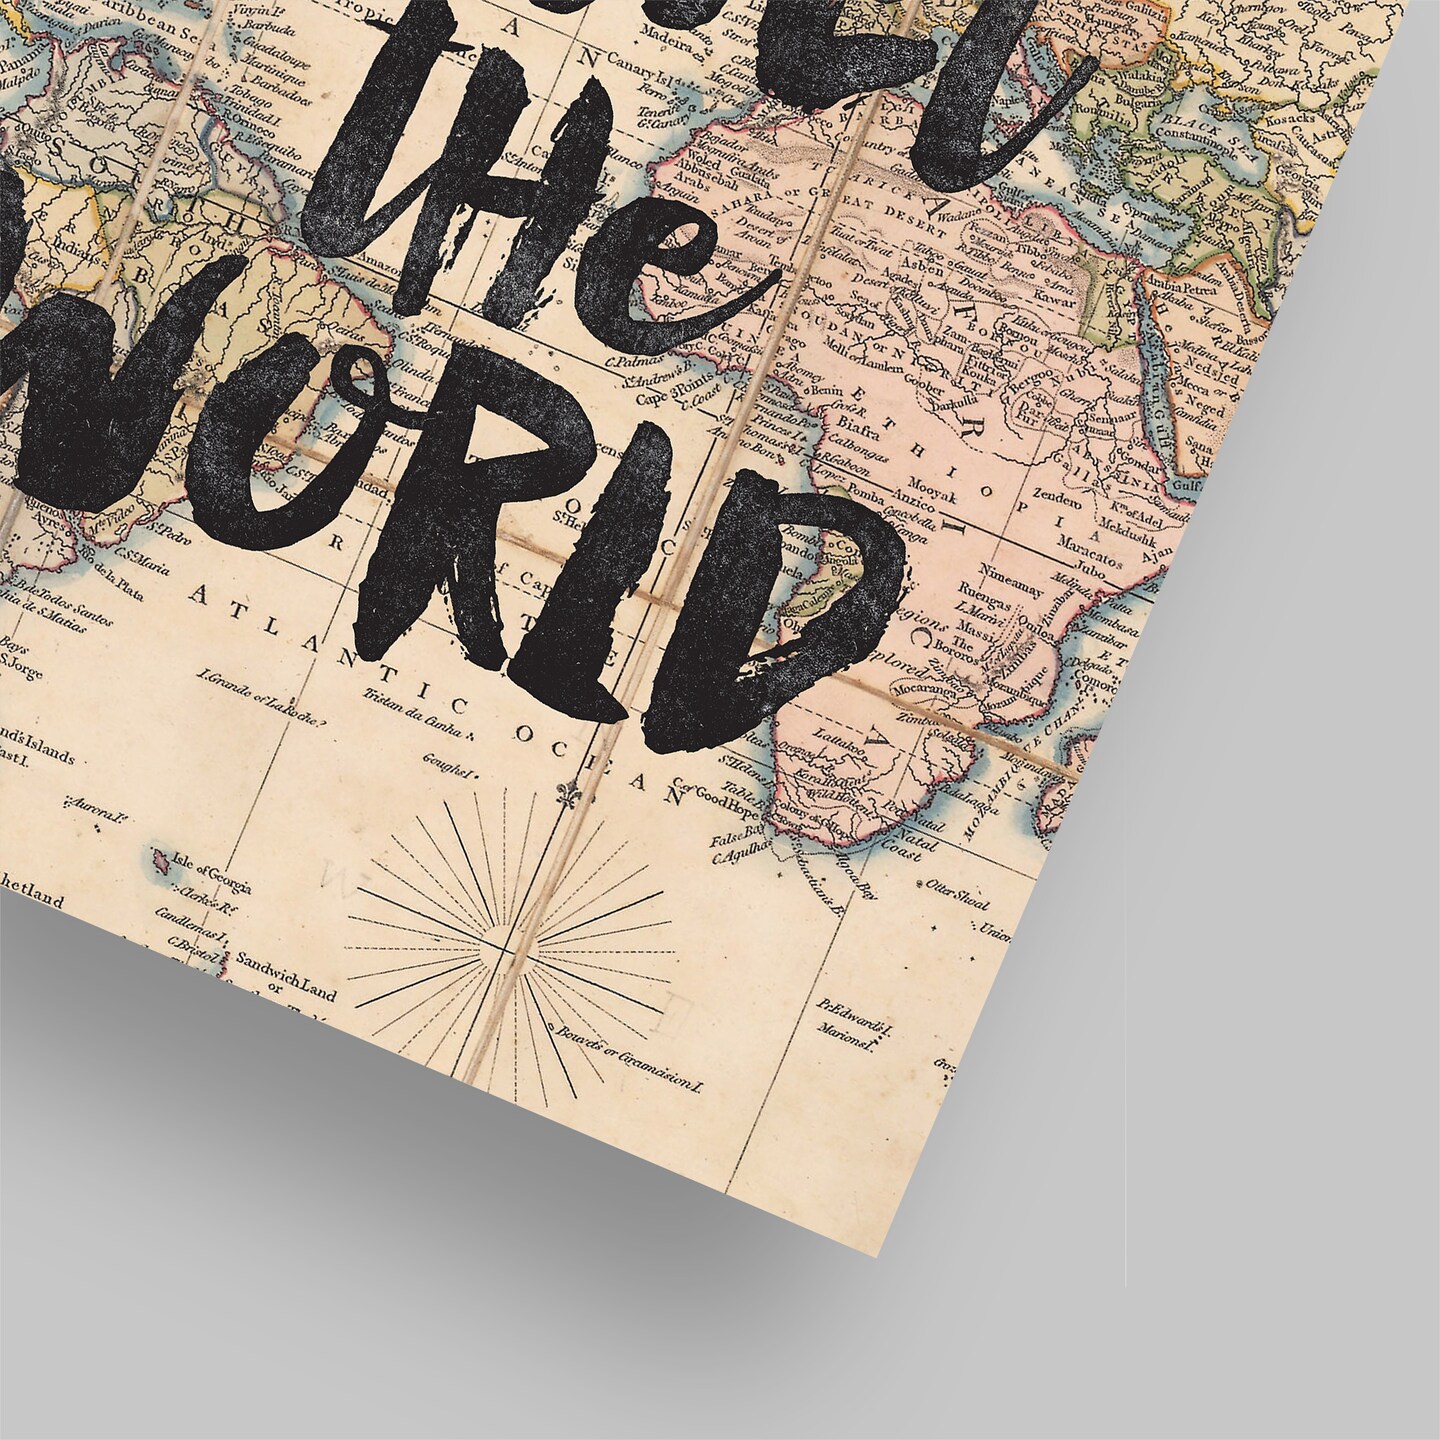 Lets Travel The World Bw by Motivated Type  Poster Art Print - Americanflat